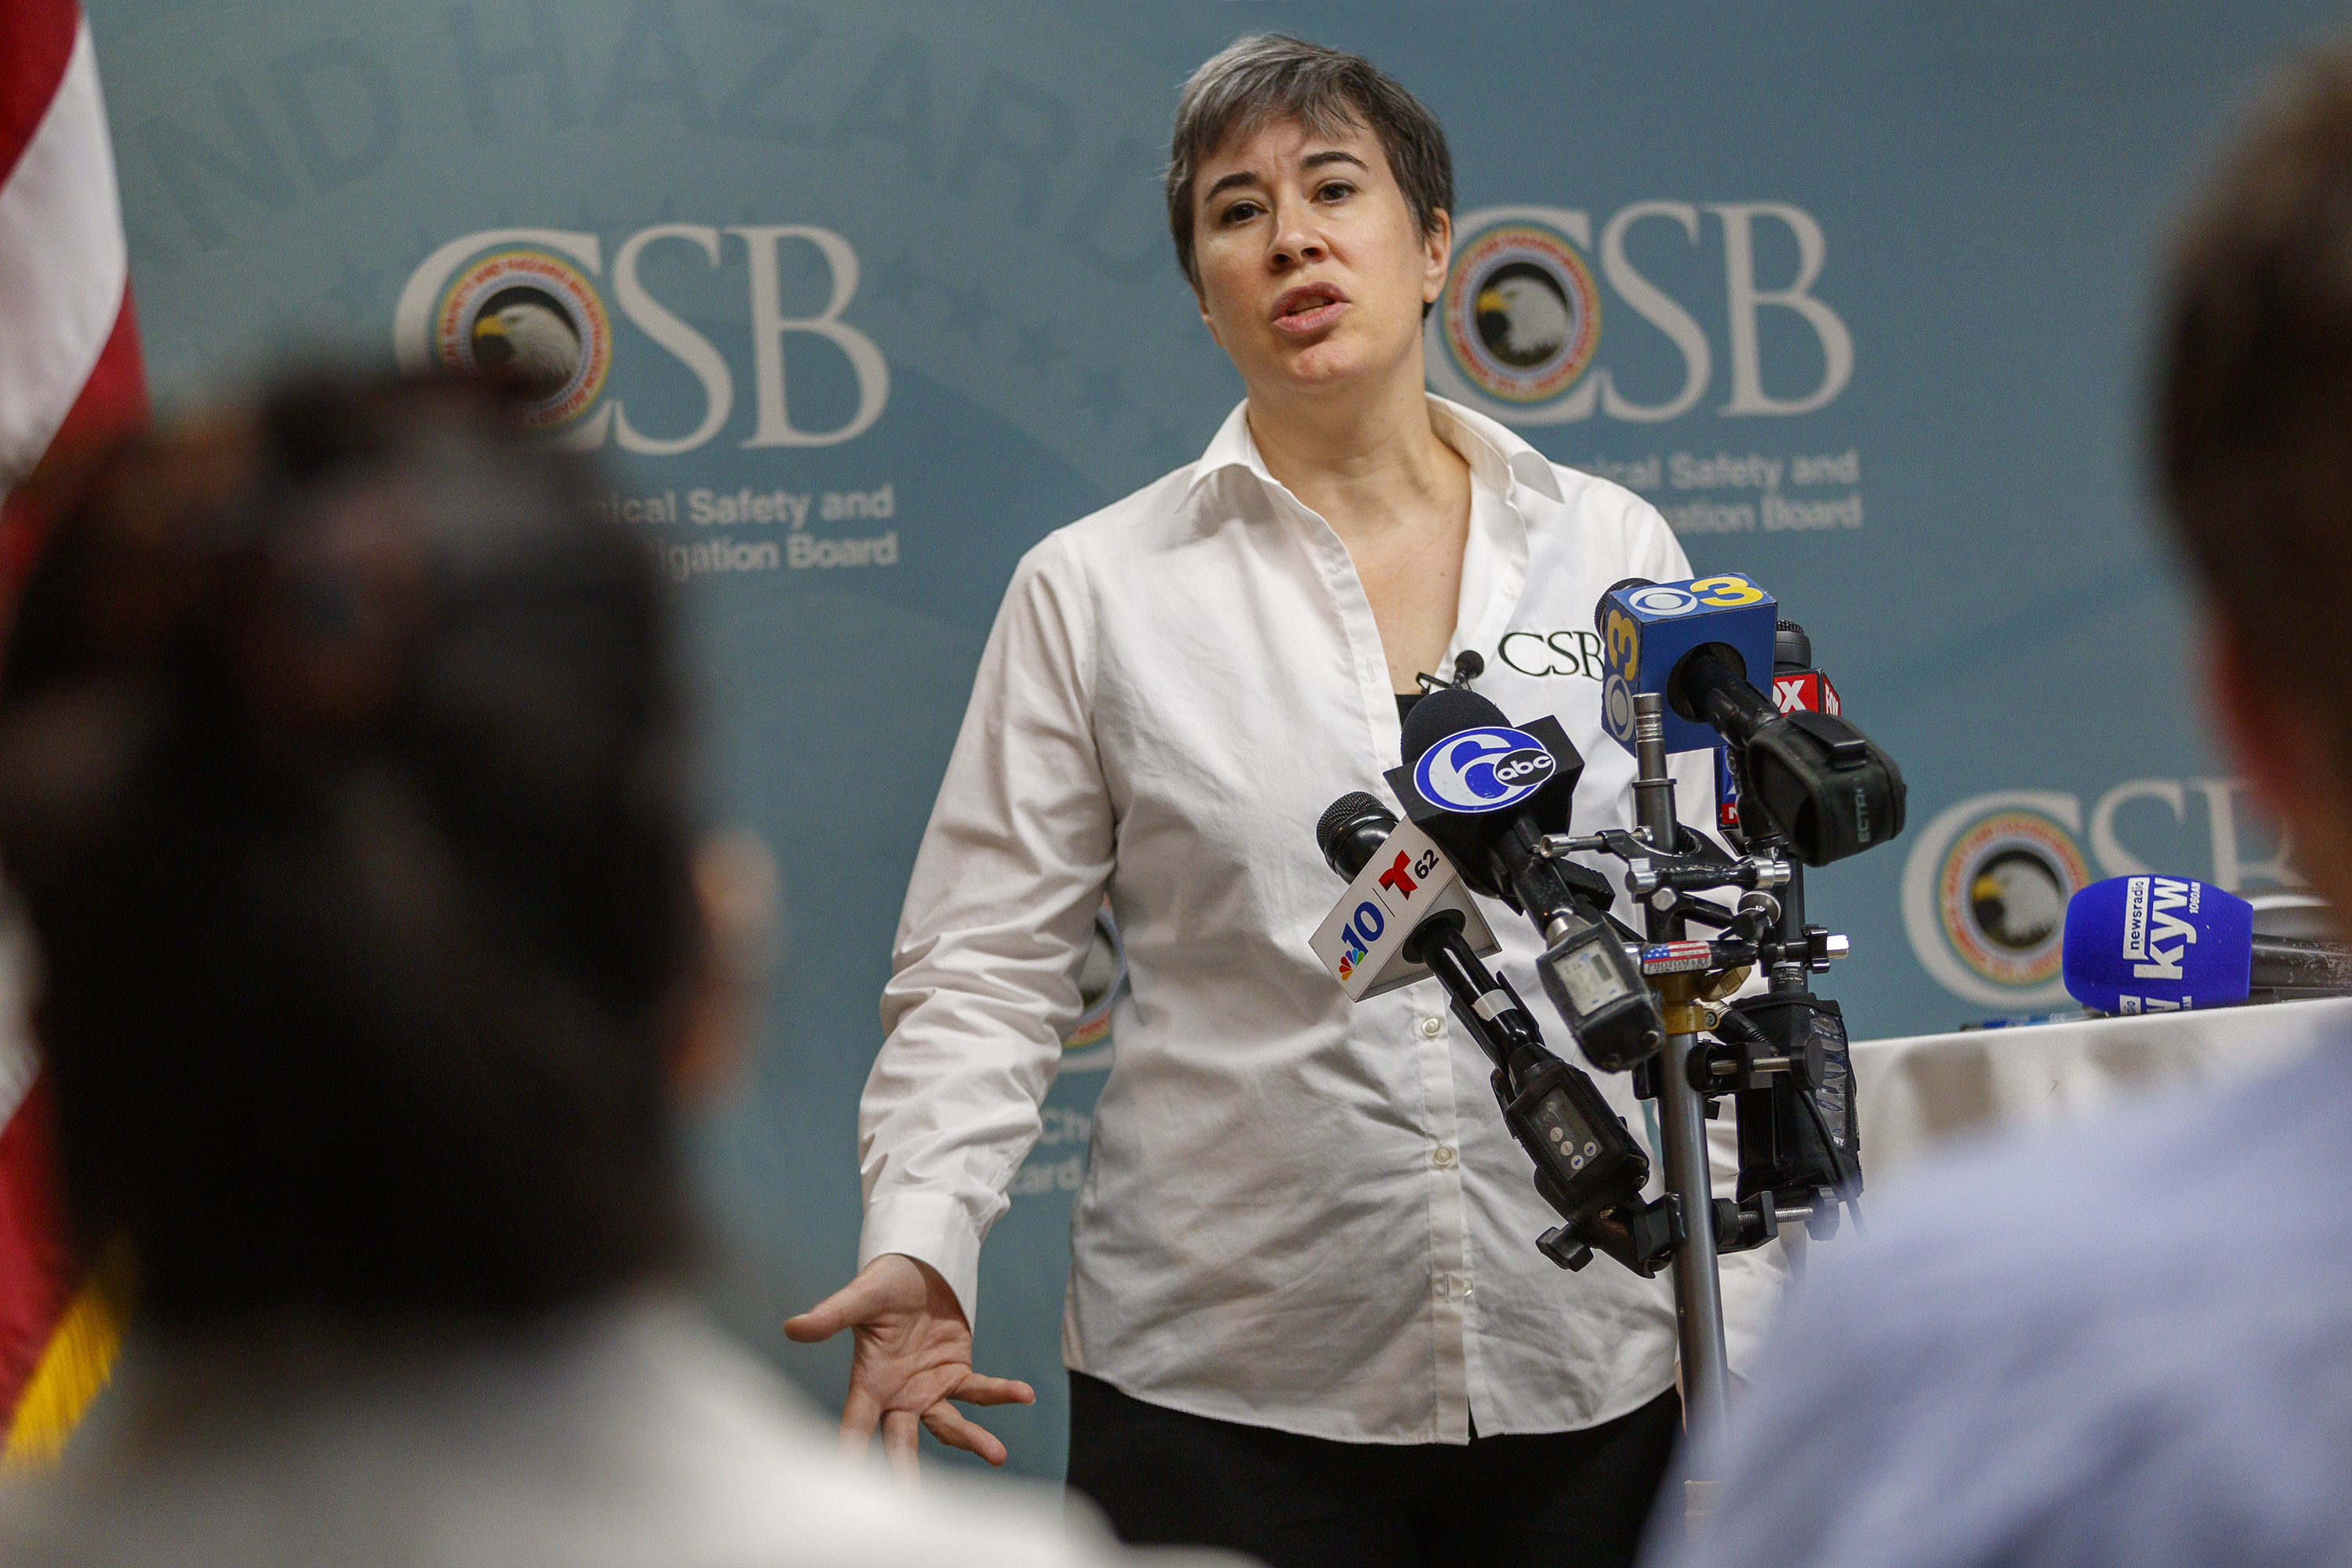 Kristen Kulinowski, then the interim chief executive of the U.S. Chemical Safety Board, answers media questions in October 2019, after releasing a preliminary report on the PES refinery fire four months earlier.